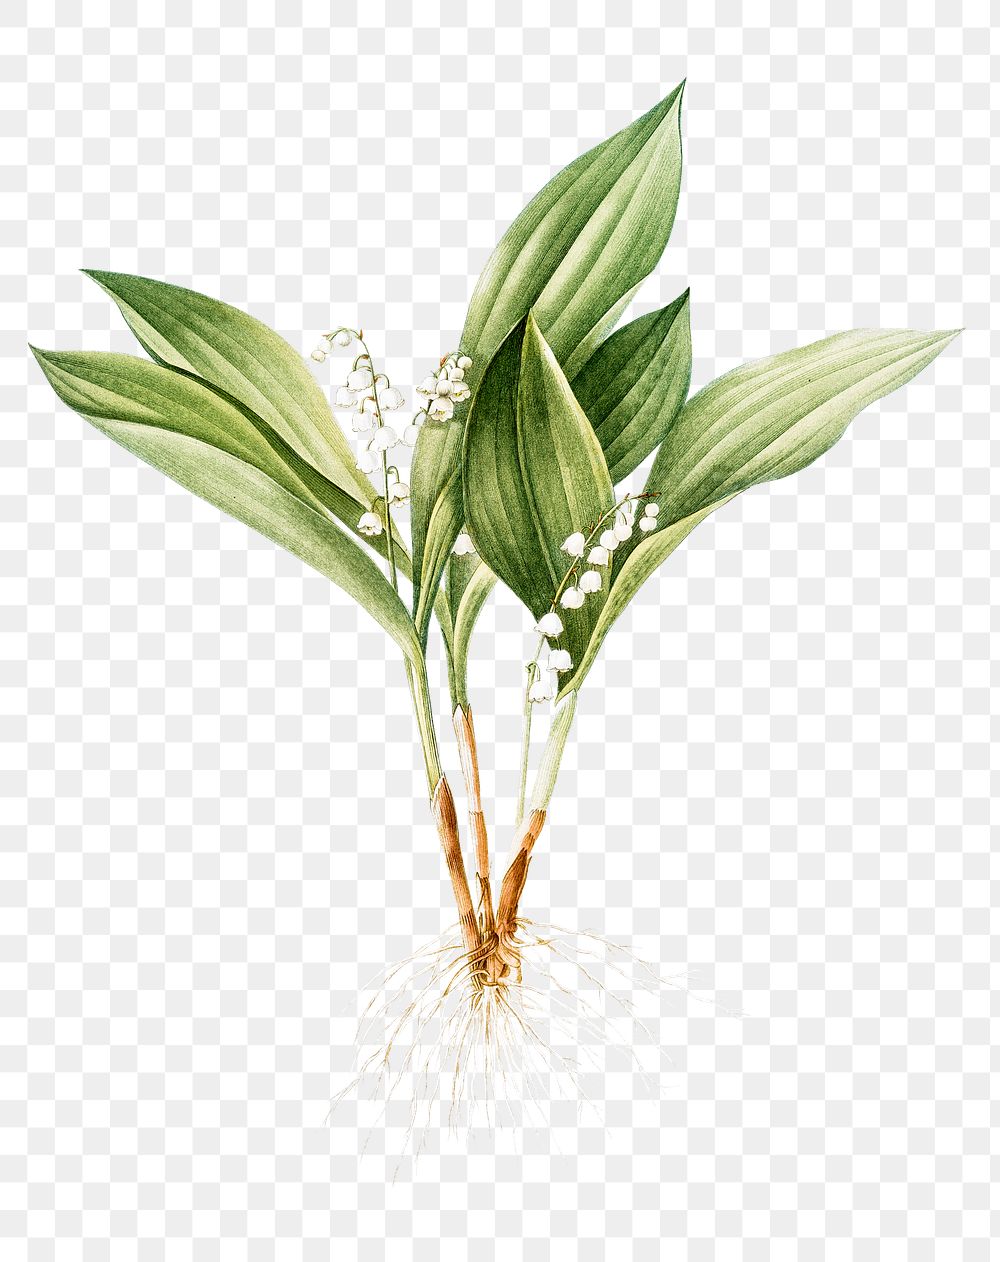 Flower png sticker, Lily of the valley, transparent background